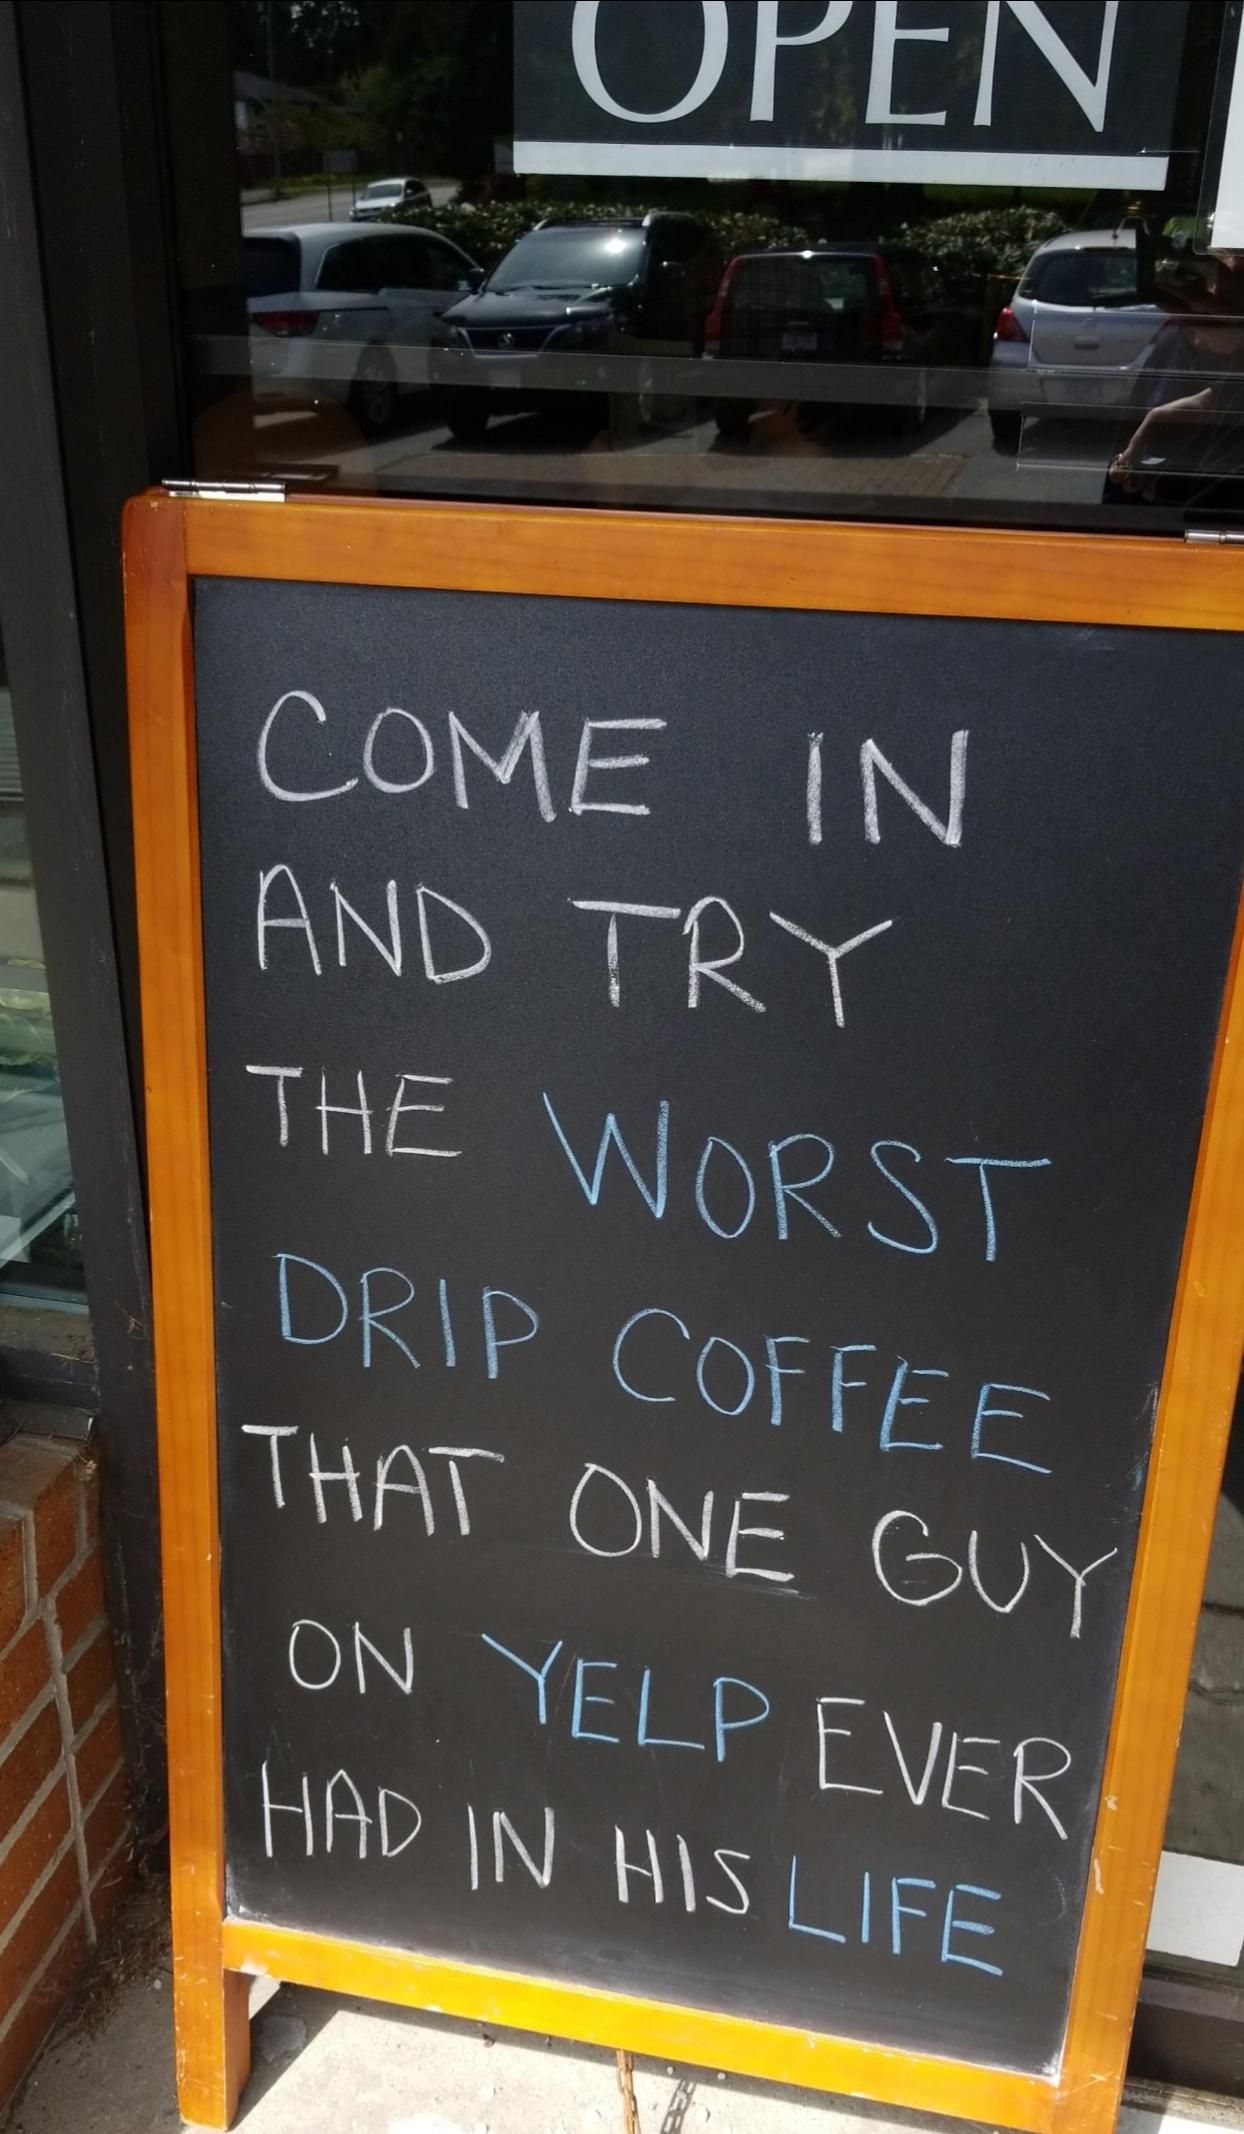 Local coffee shop combats that one guy on Yelp